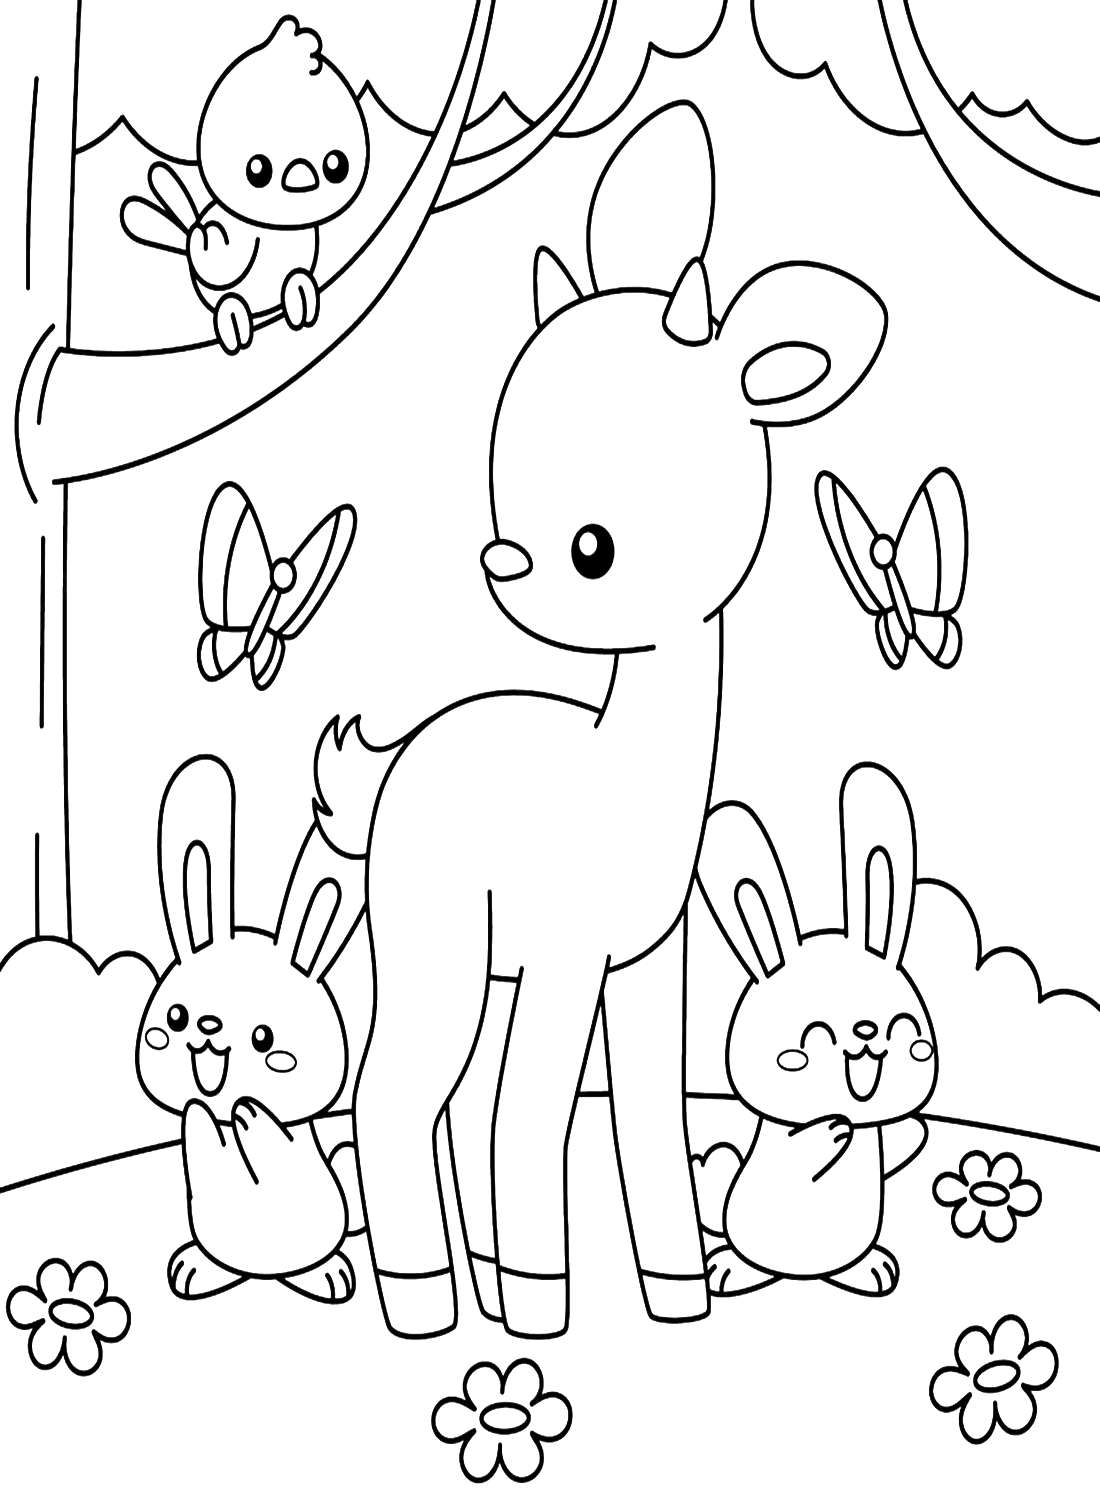 Rabbits With Friends In The Forest from Rabbit